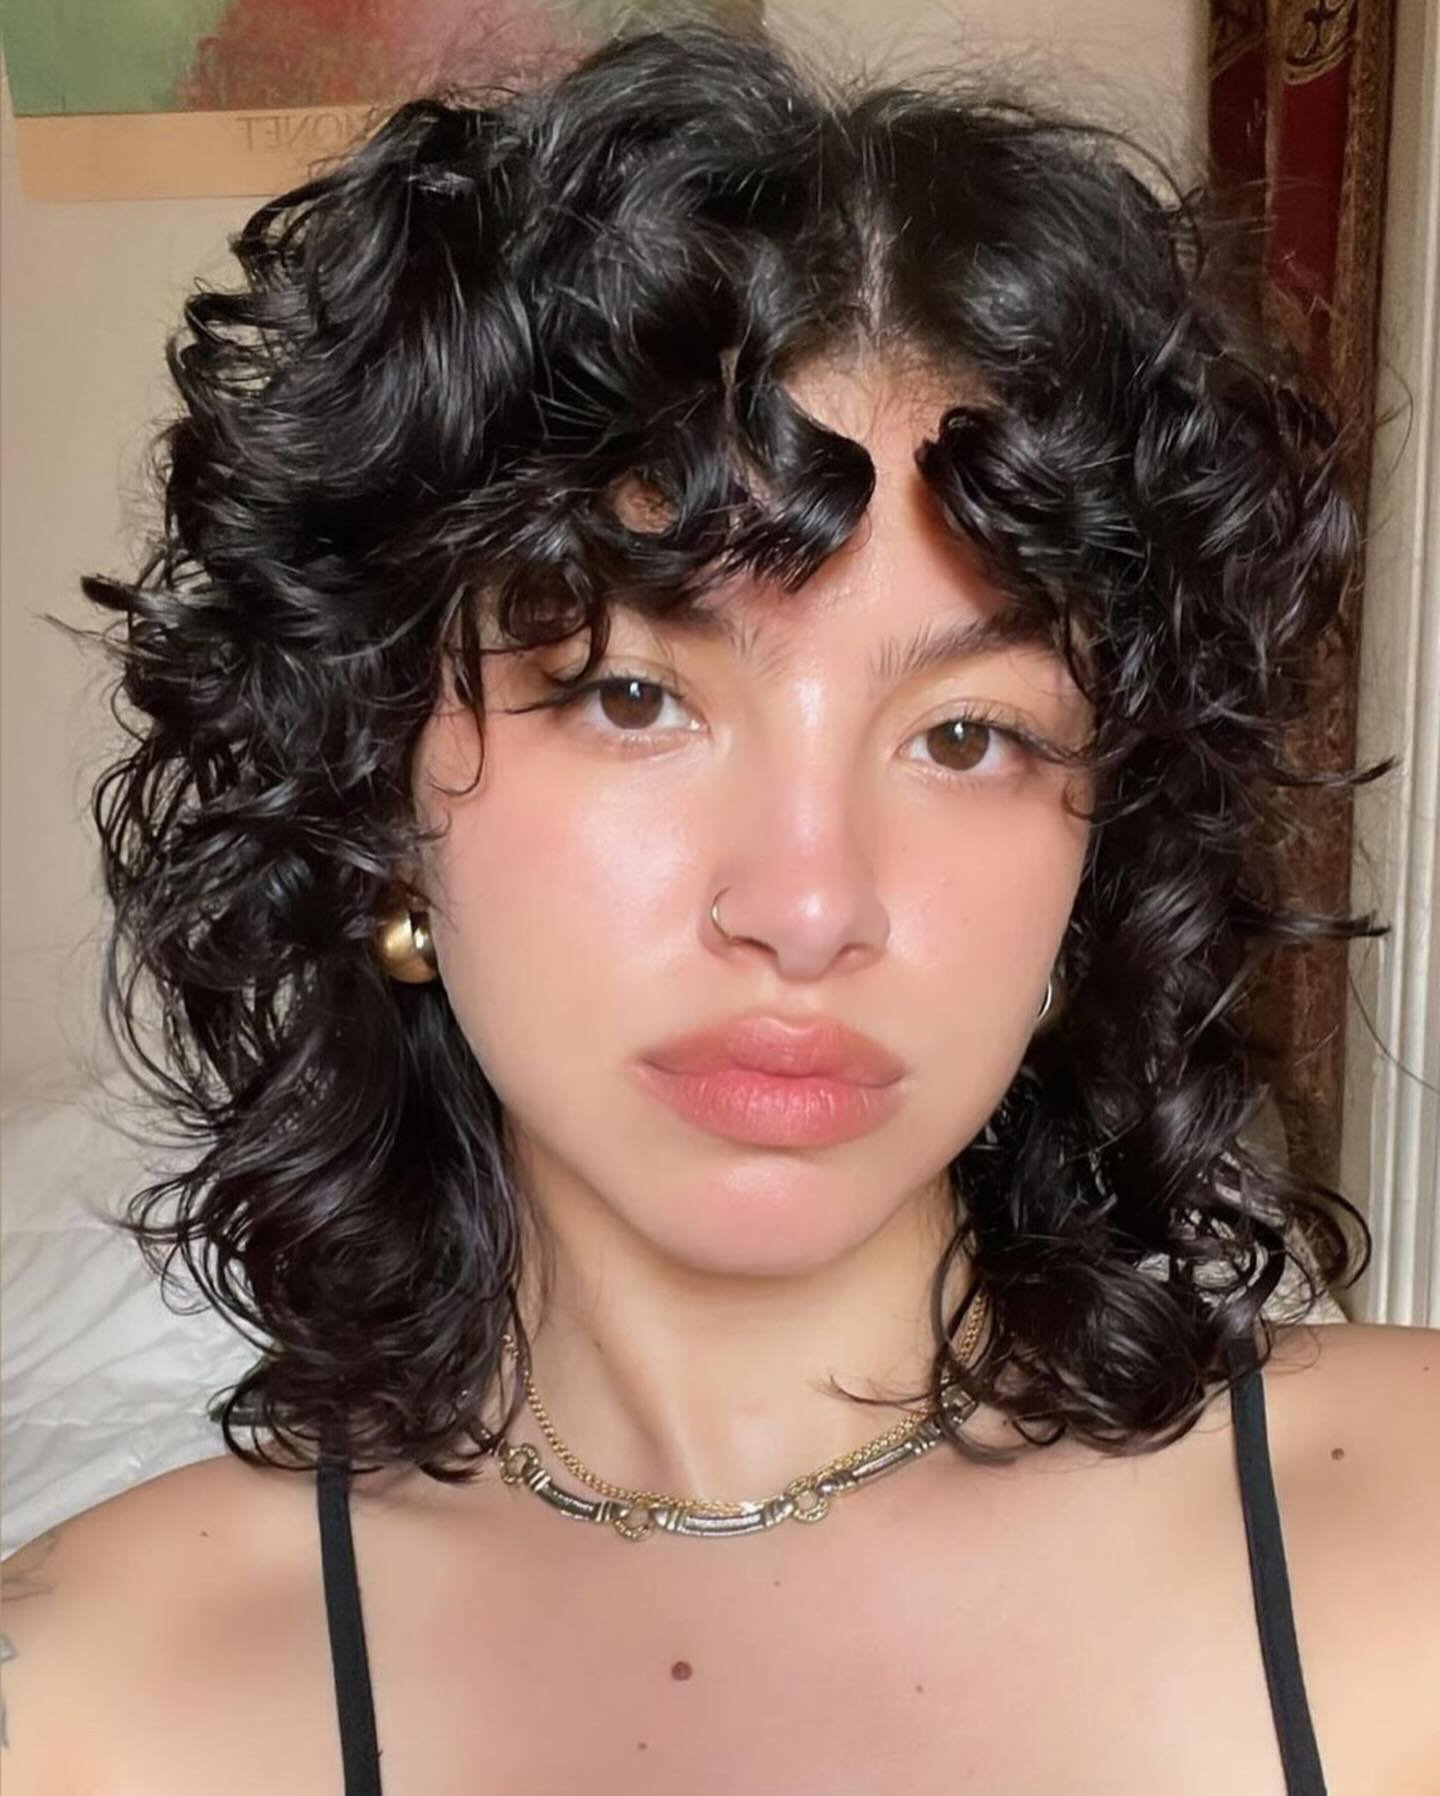 Bless Up for a client selfies this stunning!  Curly shag brought to you by @didbrendandoyourhair 
.
.
Styled with @hairstorystudio Holy Trinity: Hair Balm, Undressed &amp; Powder
.
.
#shag #curlcut #curls #phillyhair #phillyhairstylist